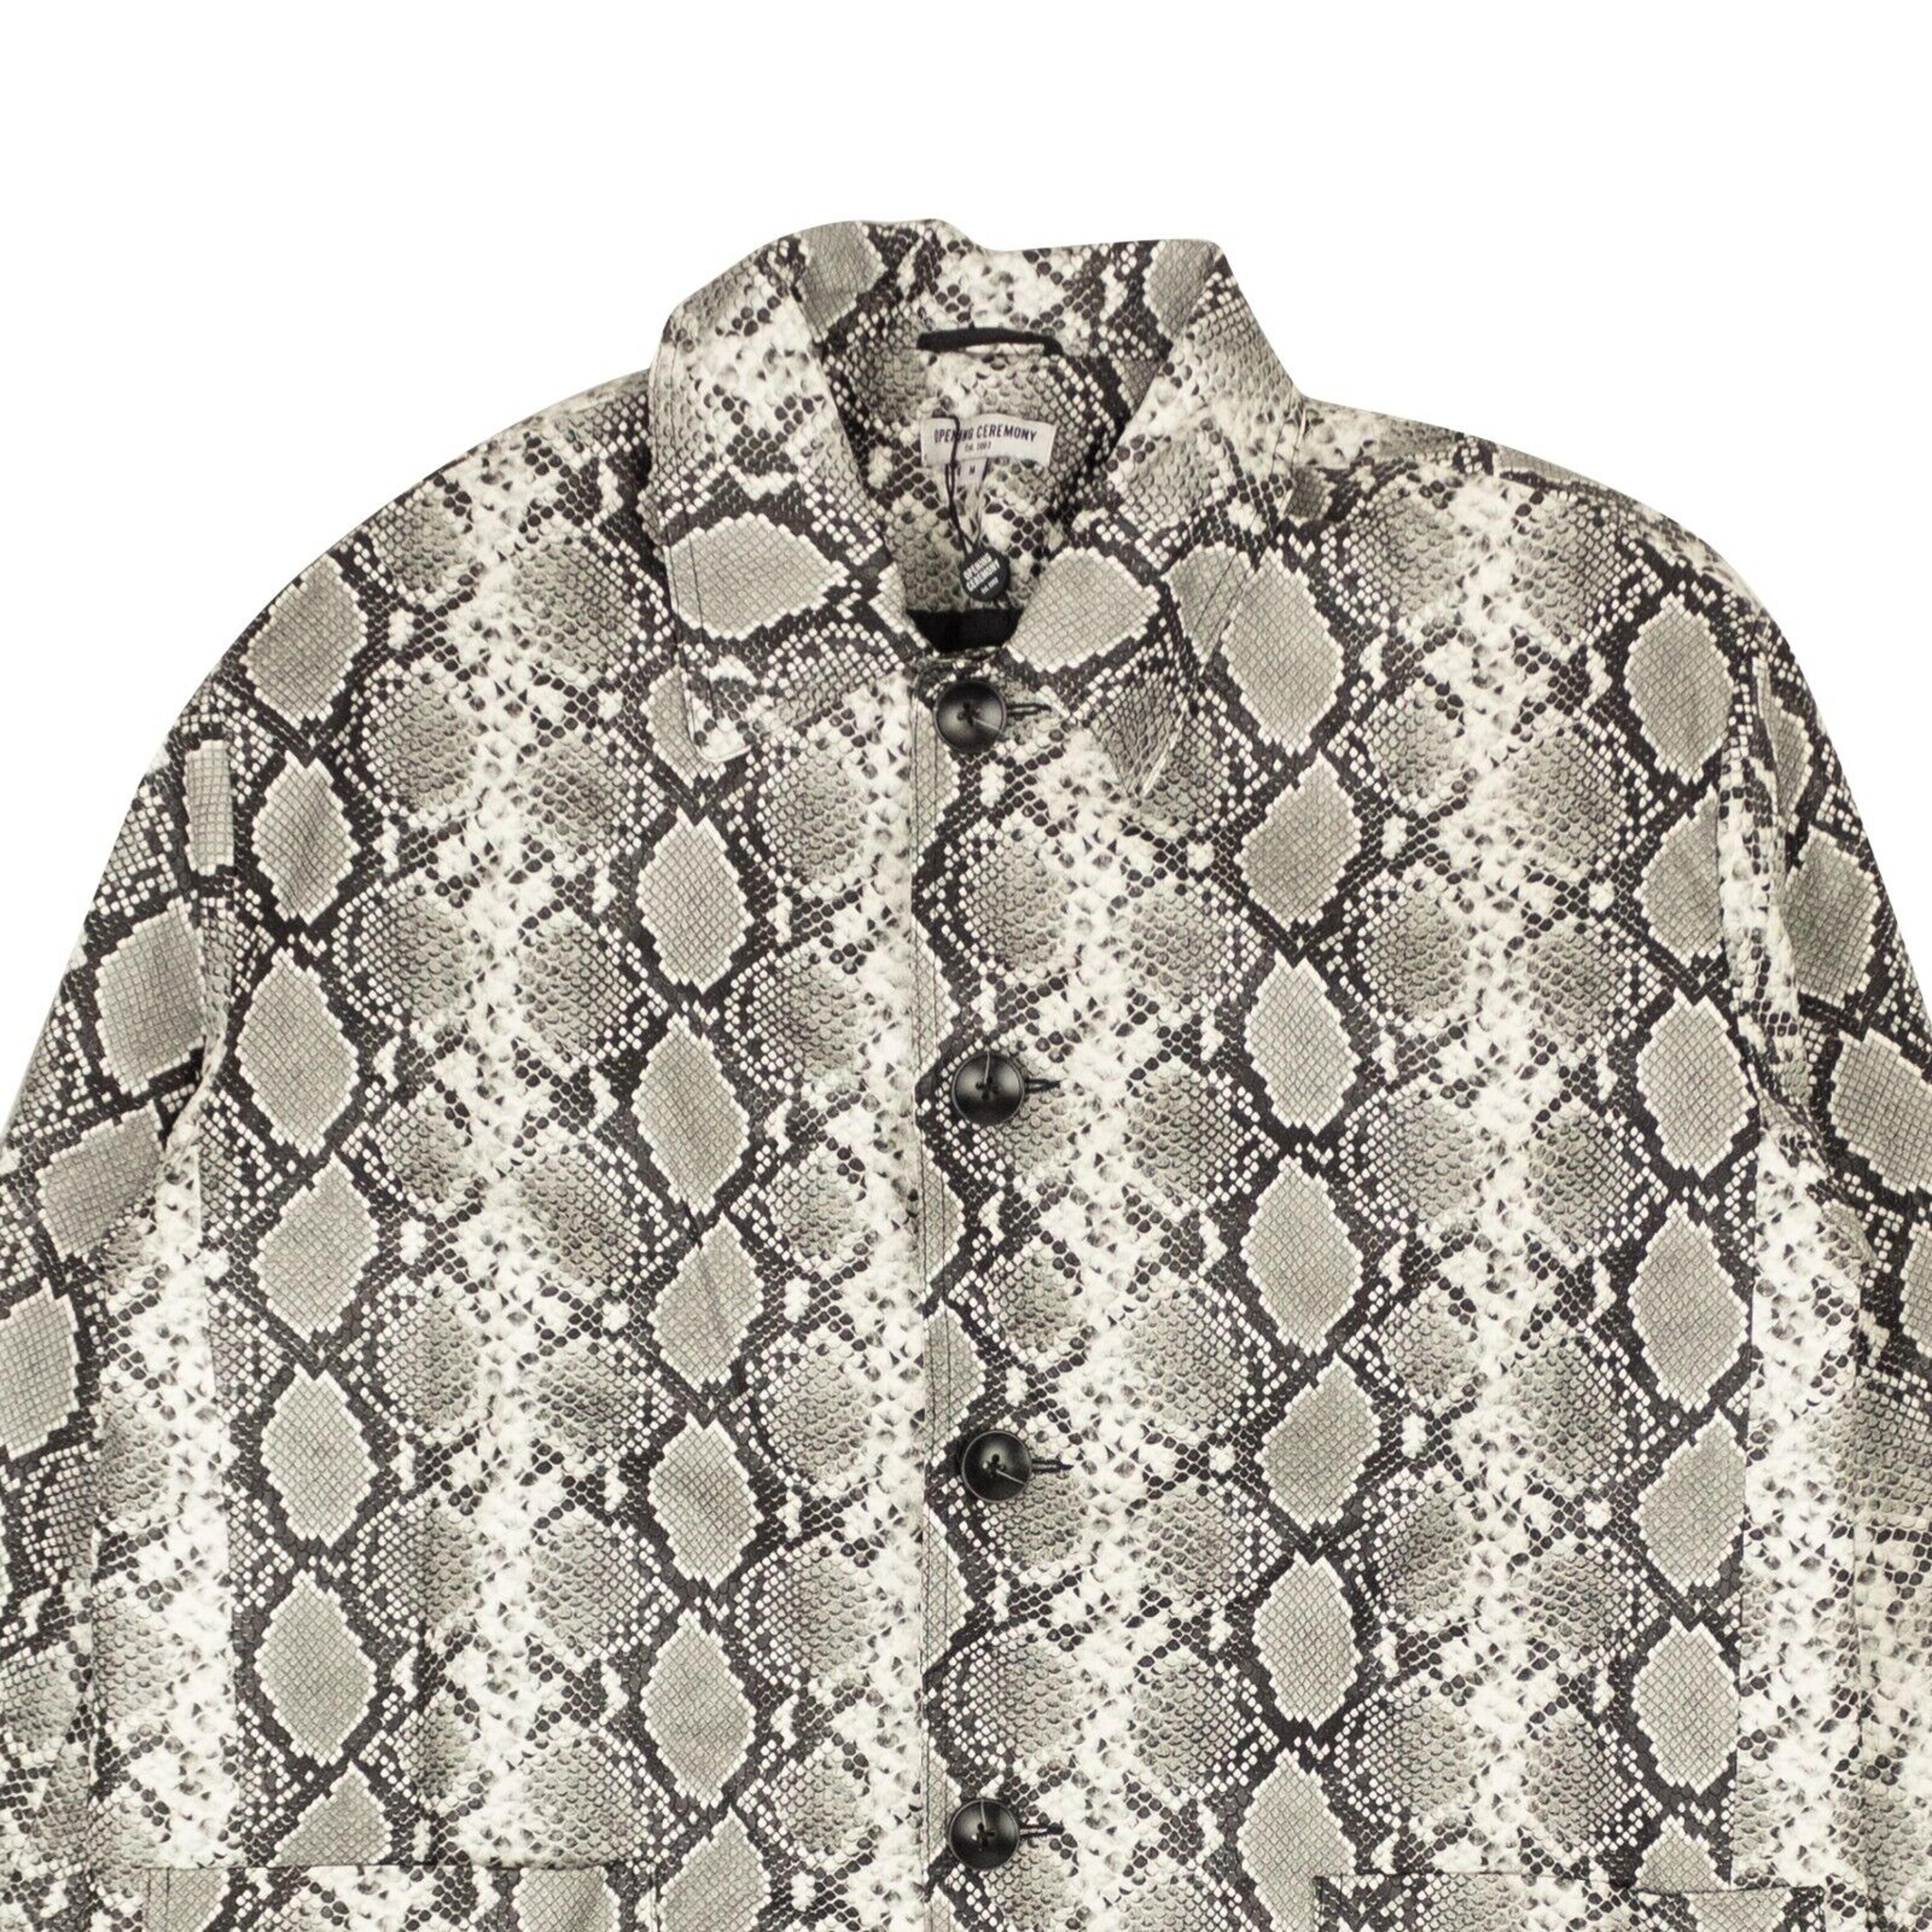 Alternate View 1 of Black And White Snake Print Faux Jacket